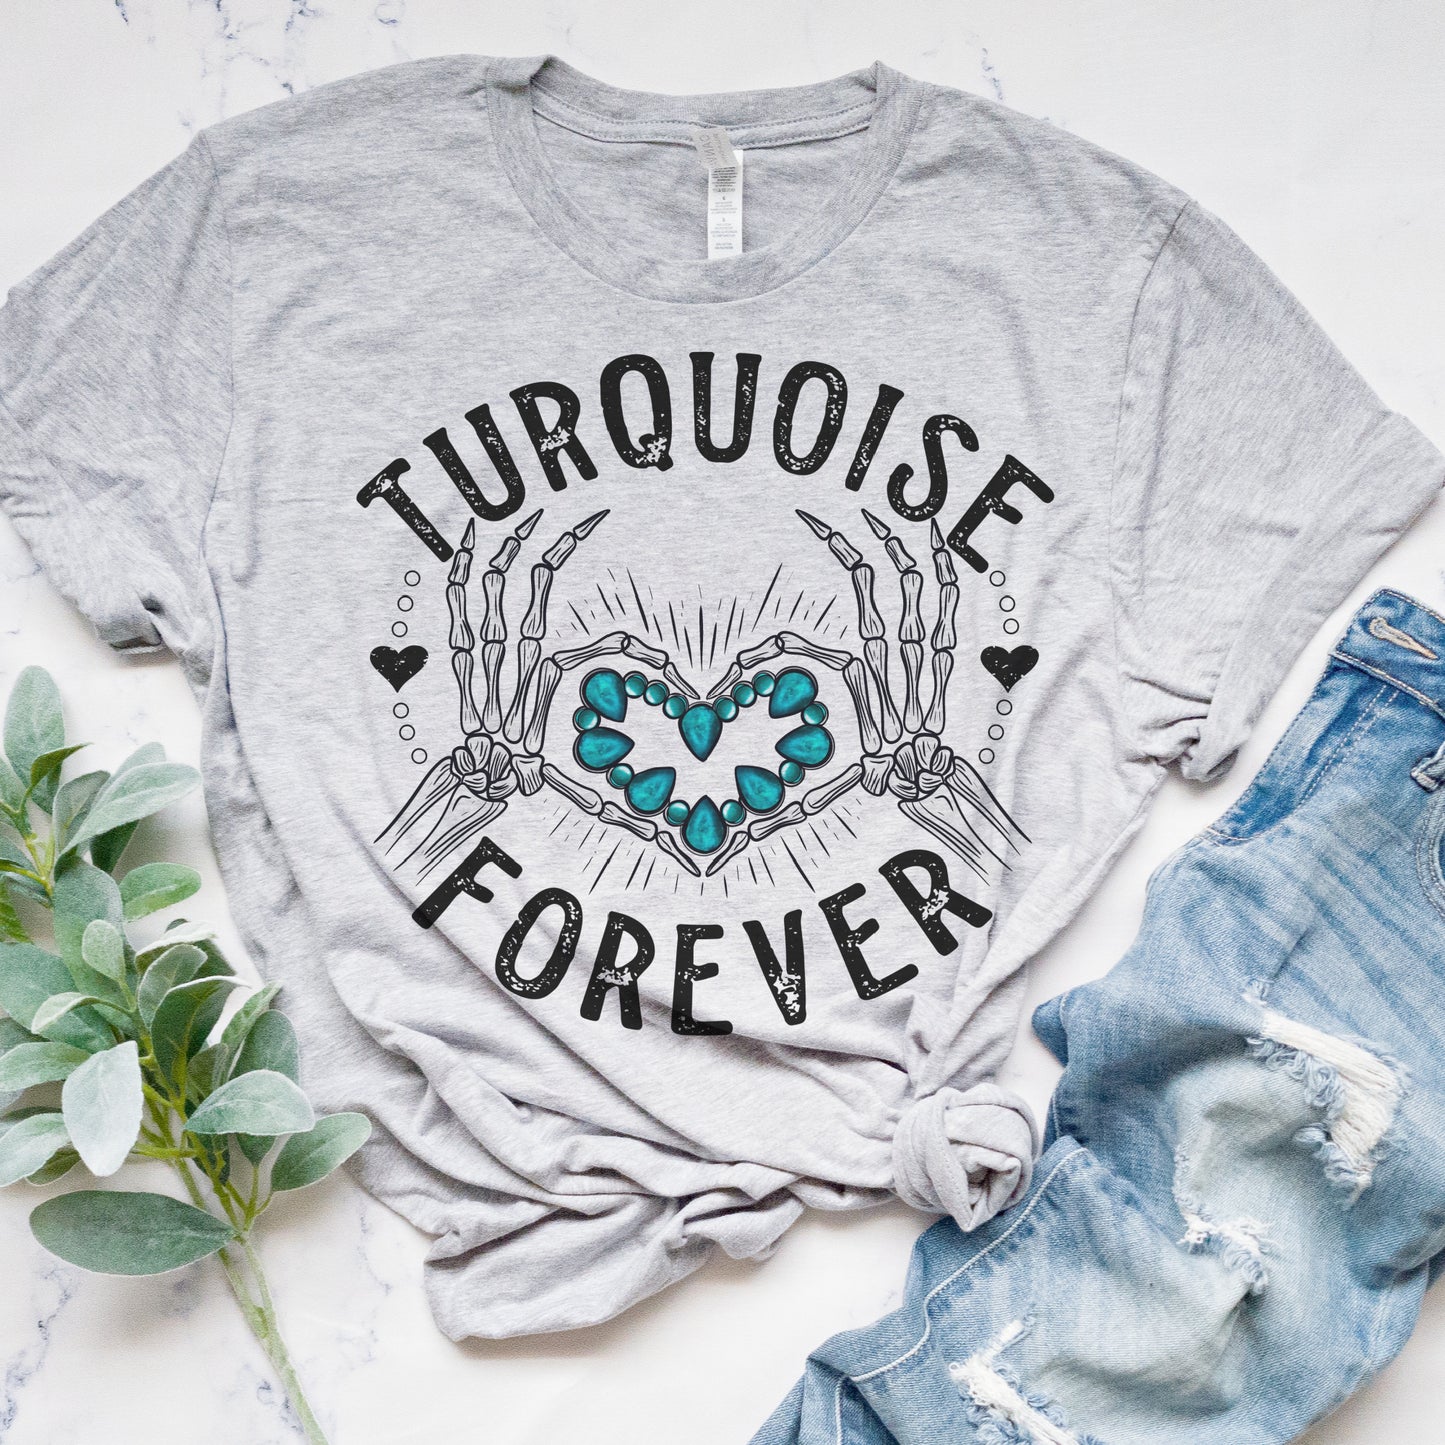 Turquoise Forever T-Shirt Funny Relatable Tshirt Favorite Color Tee Turquoise Shirt Soft Print T-Shirt Sublimation Print Tee